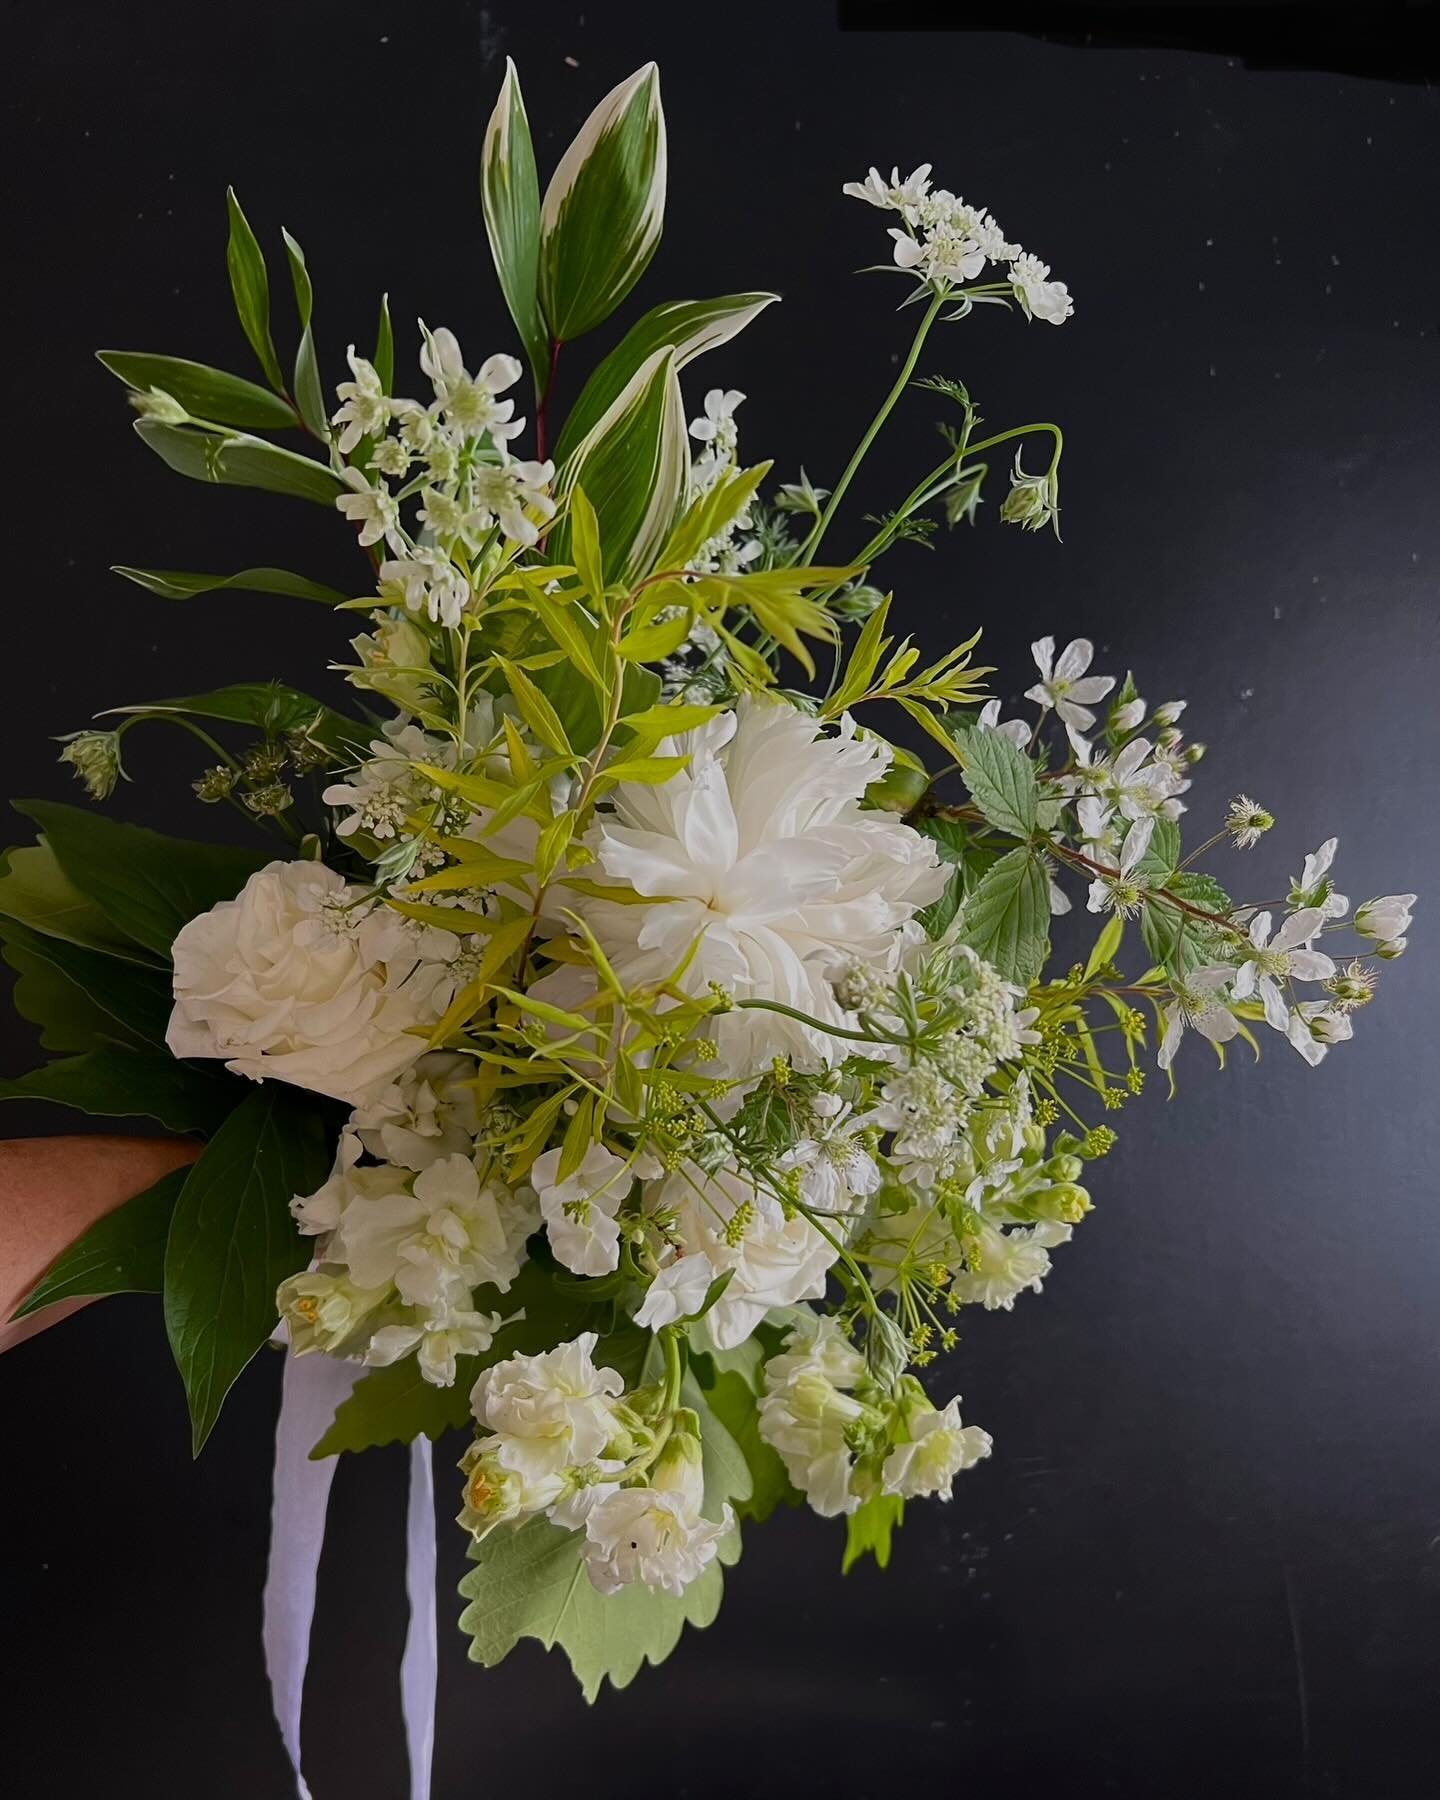 Wedding on a Tuesday in a national park?  And you want wildflowery but seasonal?  Igotchoo. 

#virginiagrownflowers #virginiagrown #localflowers #shenandoahwedding #snp #virginiawedding #wildflowerwedding #wildflowerbouquet #weddingflorist #virginiaw